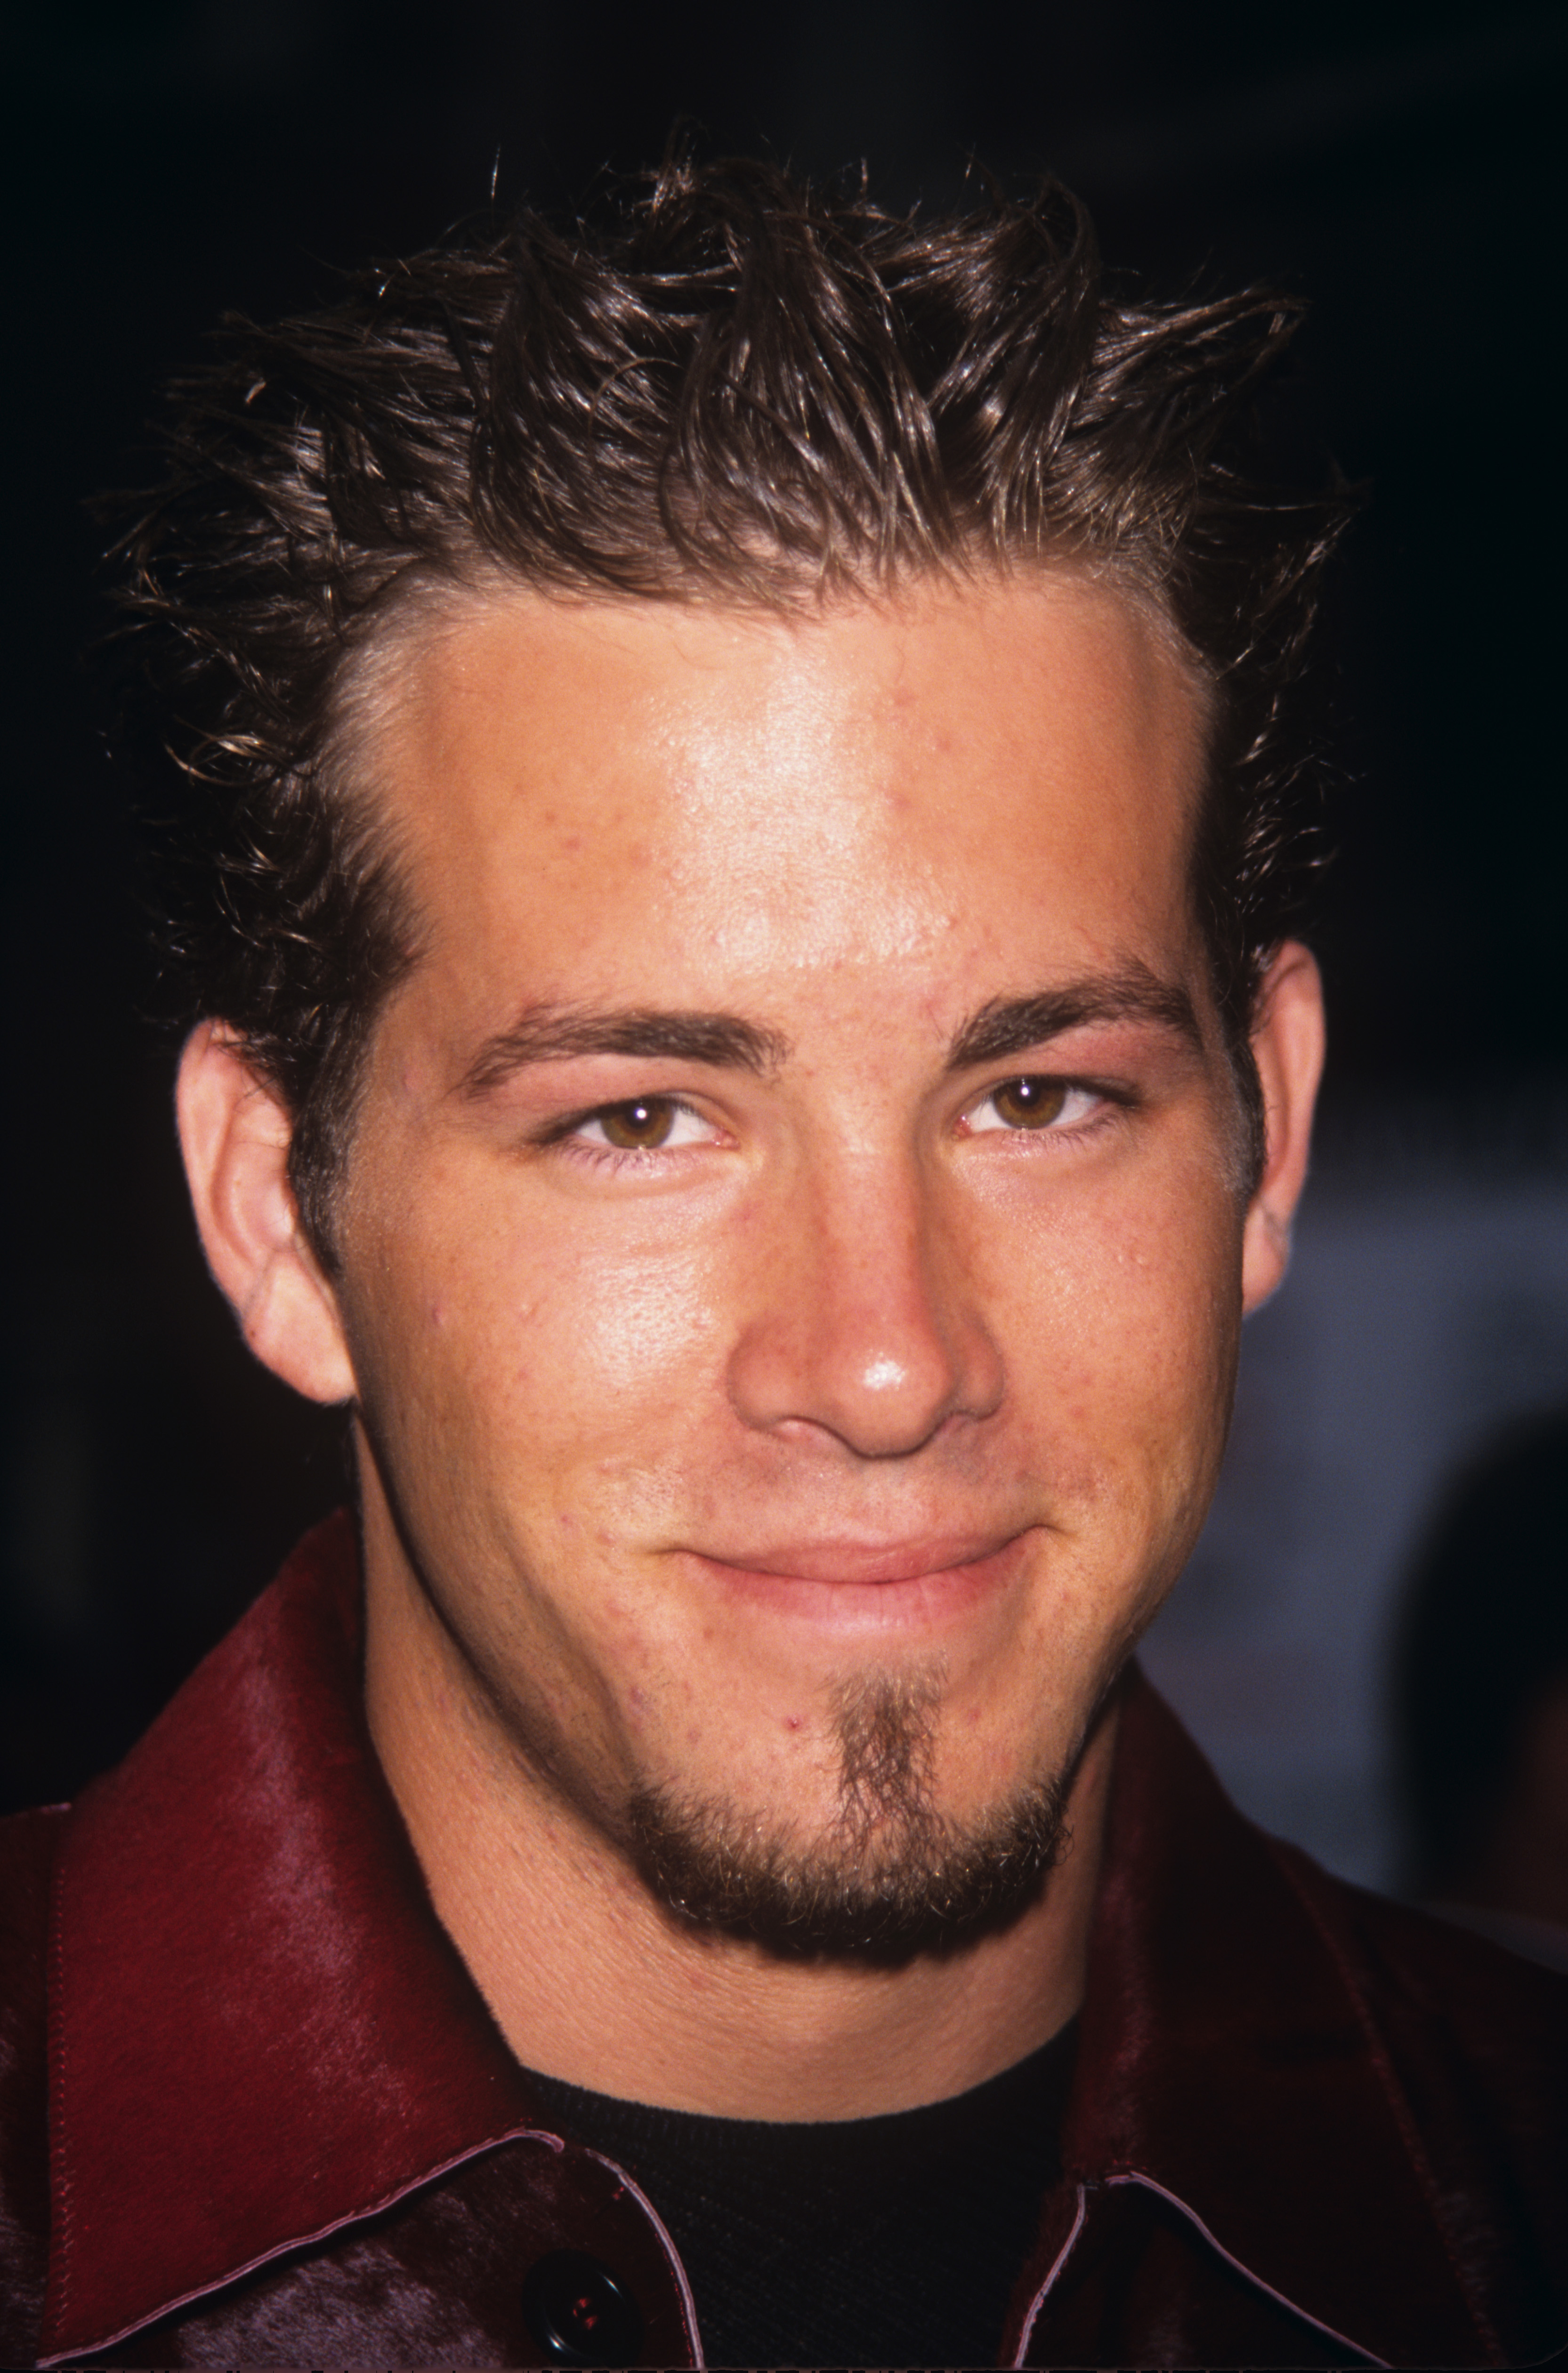 Ryan Reynolds attending a party at the New Amsterdam Theatre in New York City on May 18, 1999 | Source: Getty Images